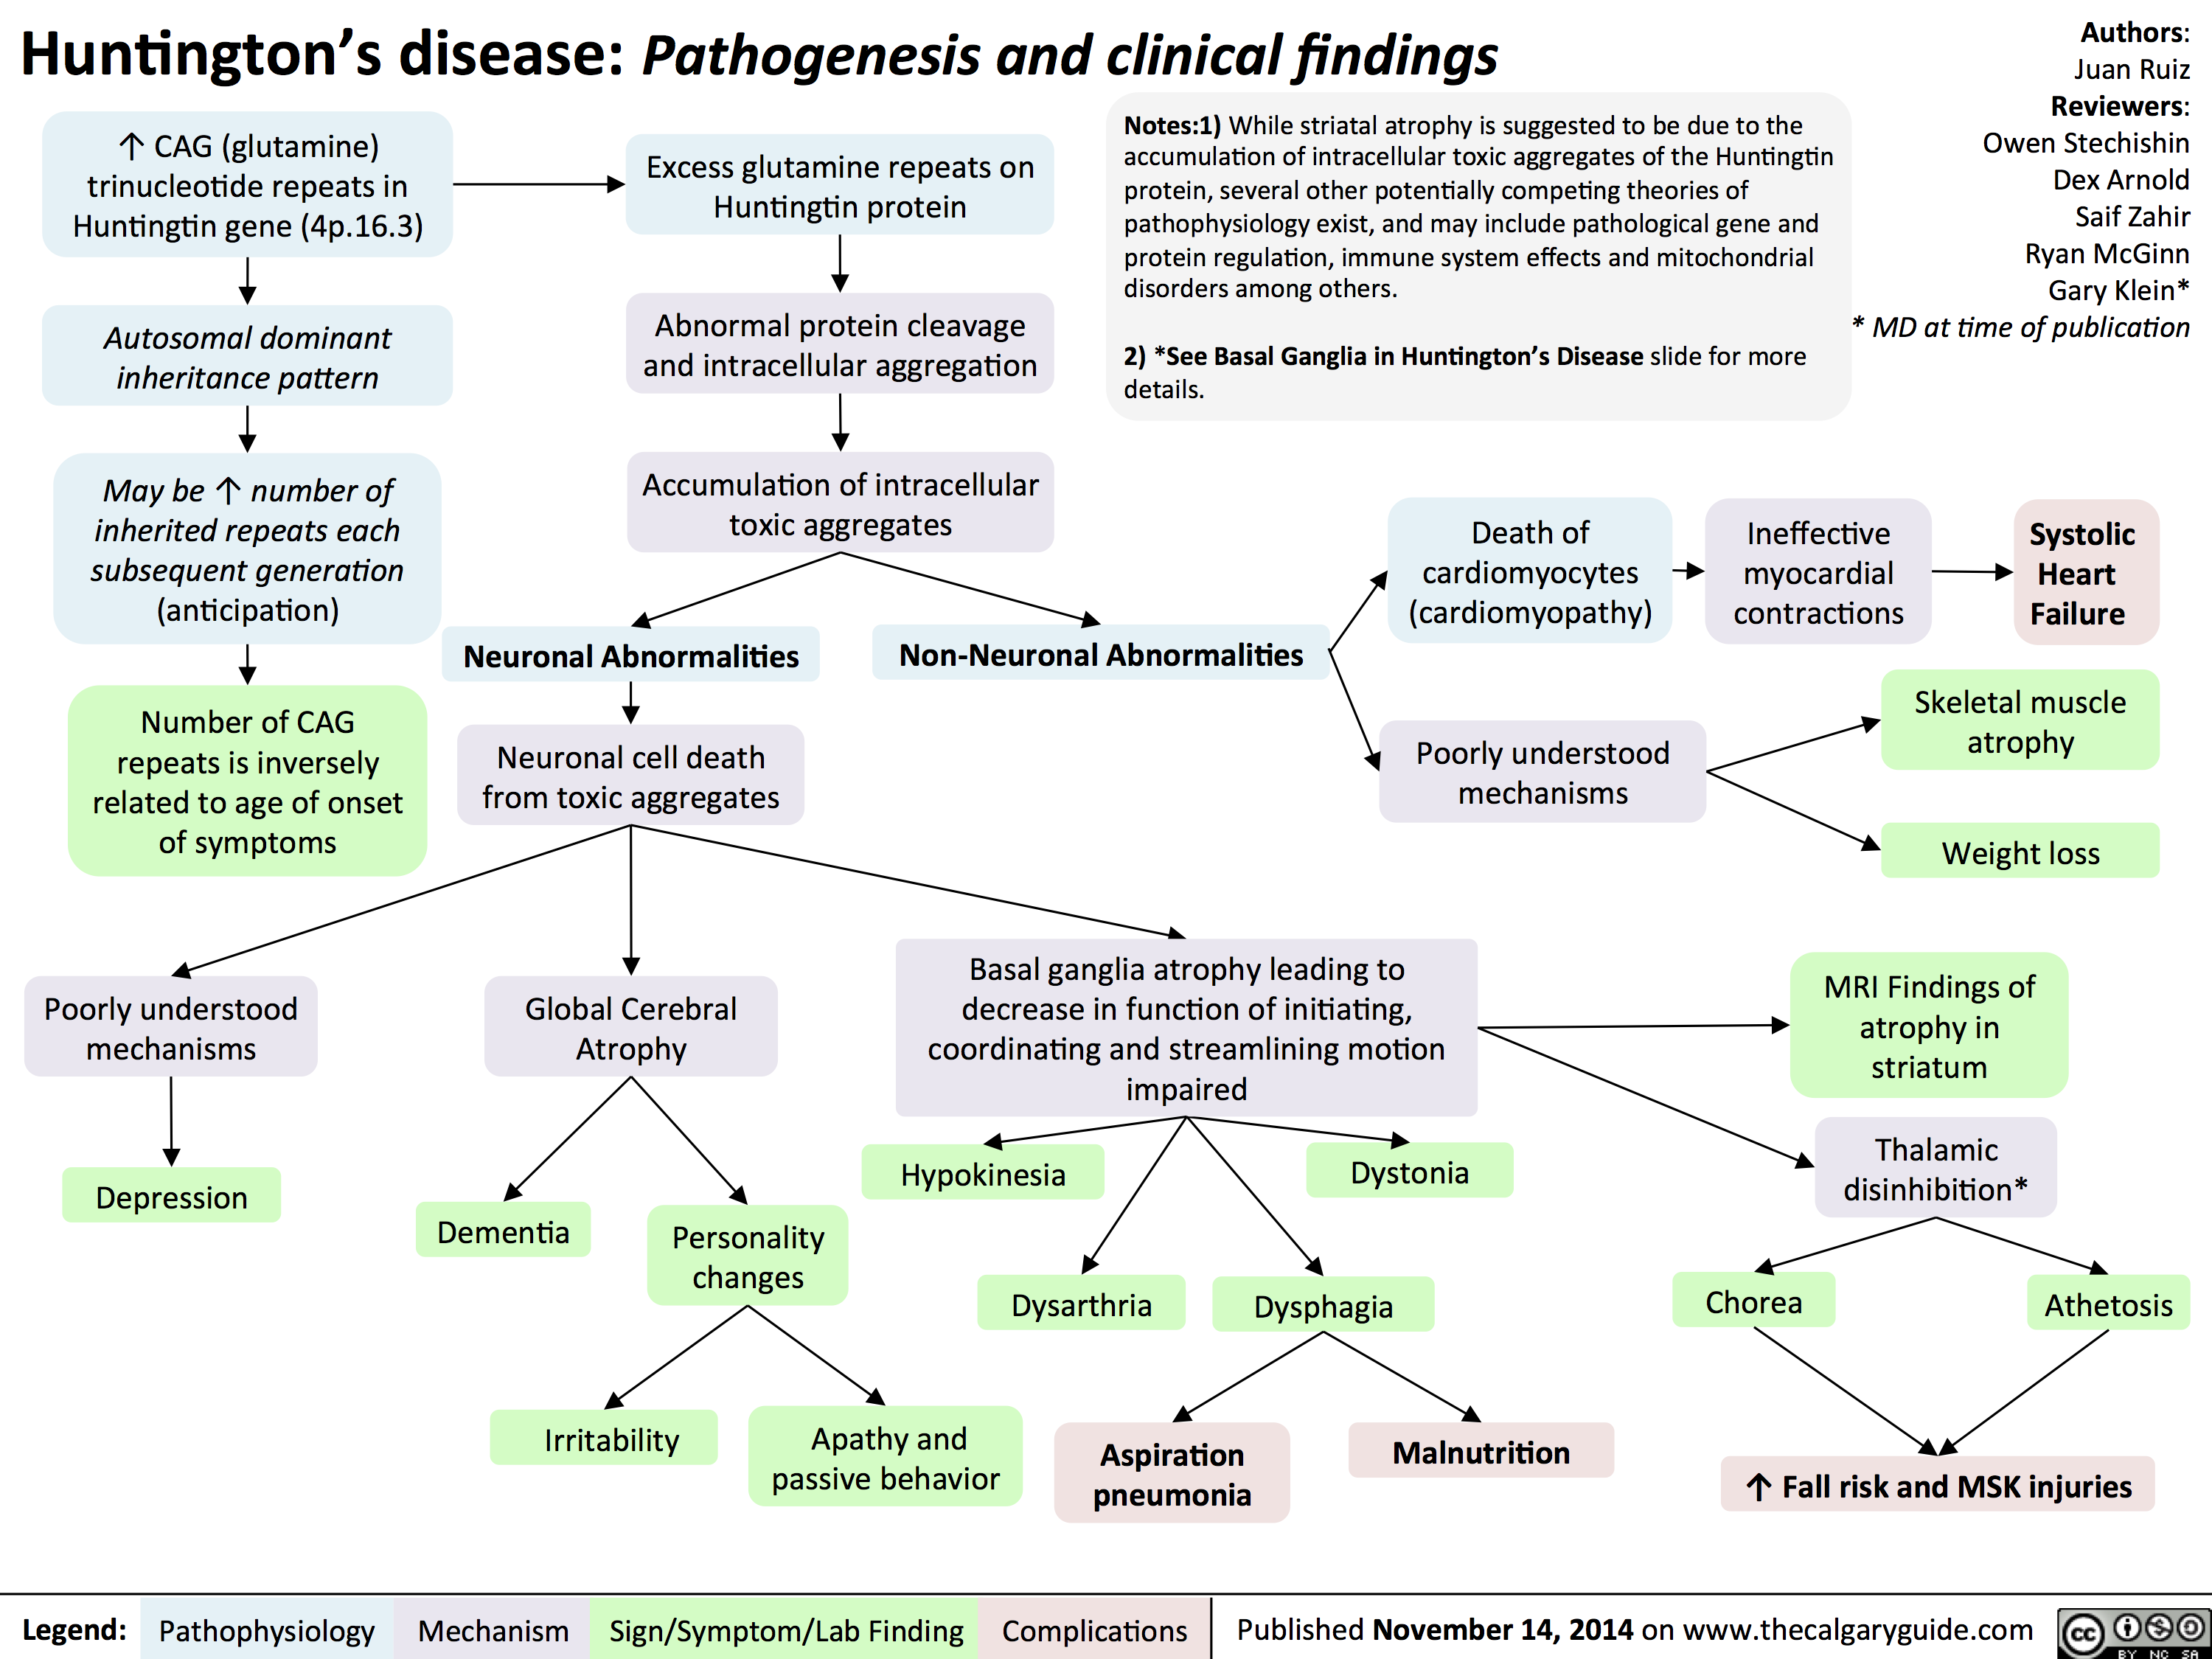 Huntingtons Disease Pathogenesis and Clinical Findings